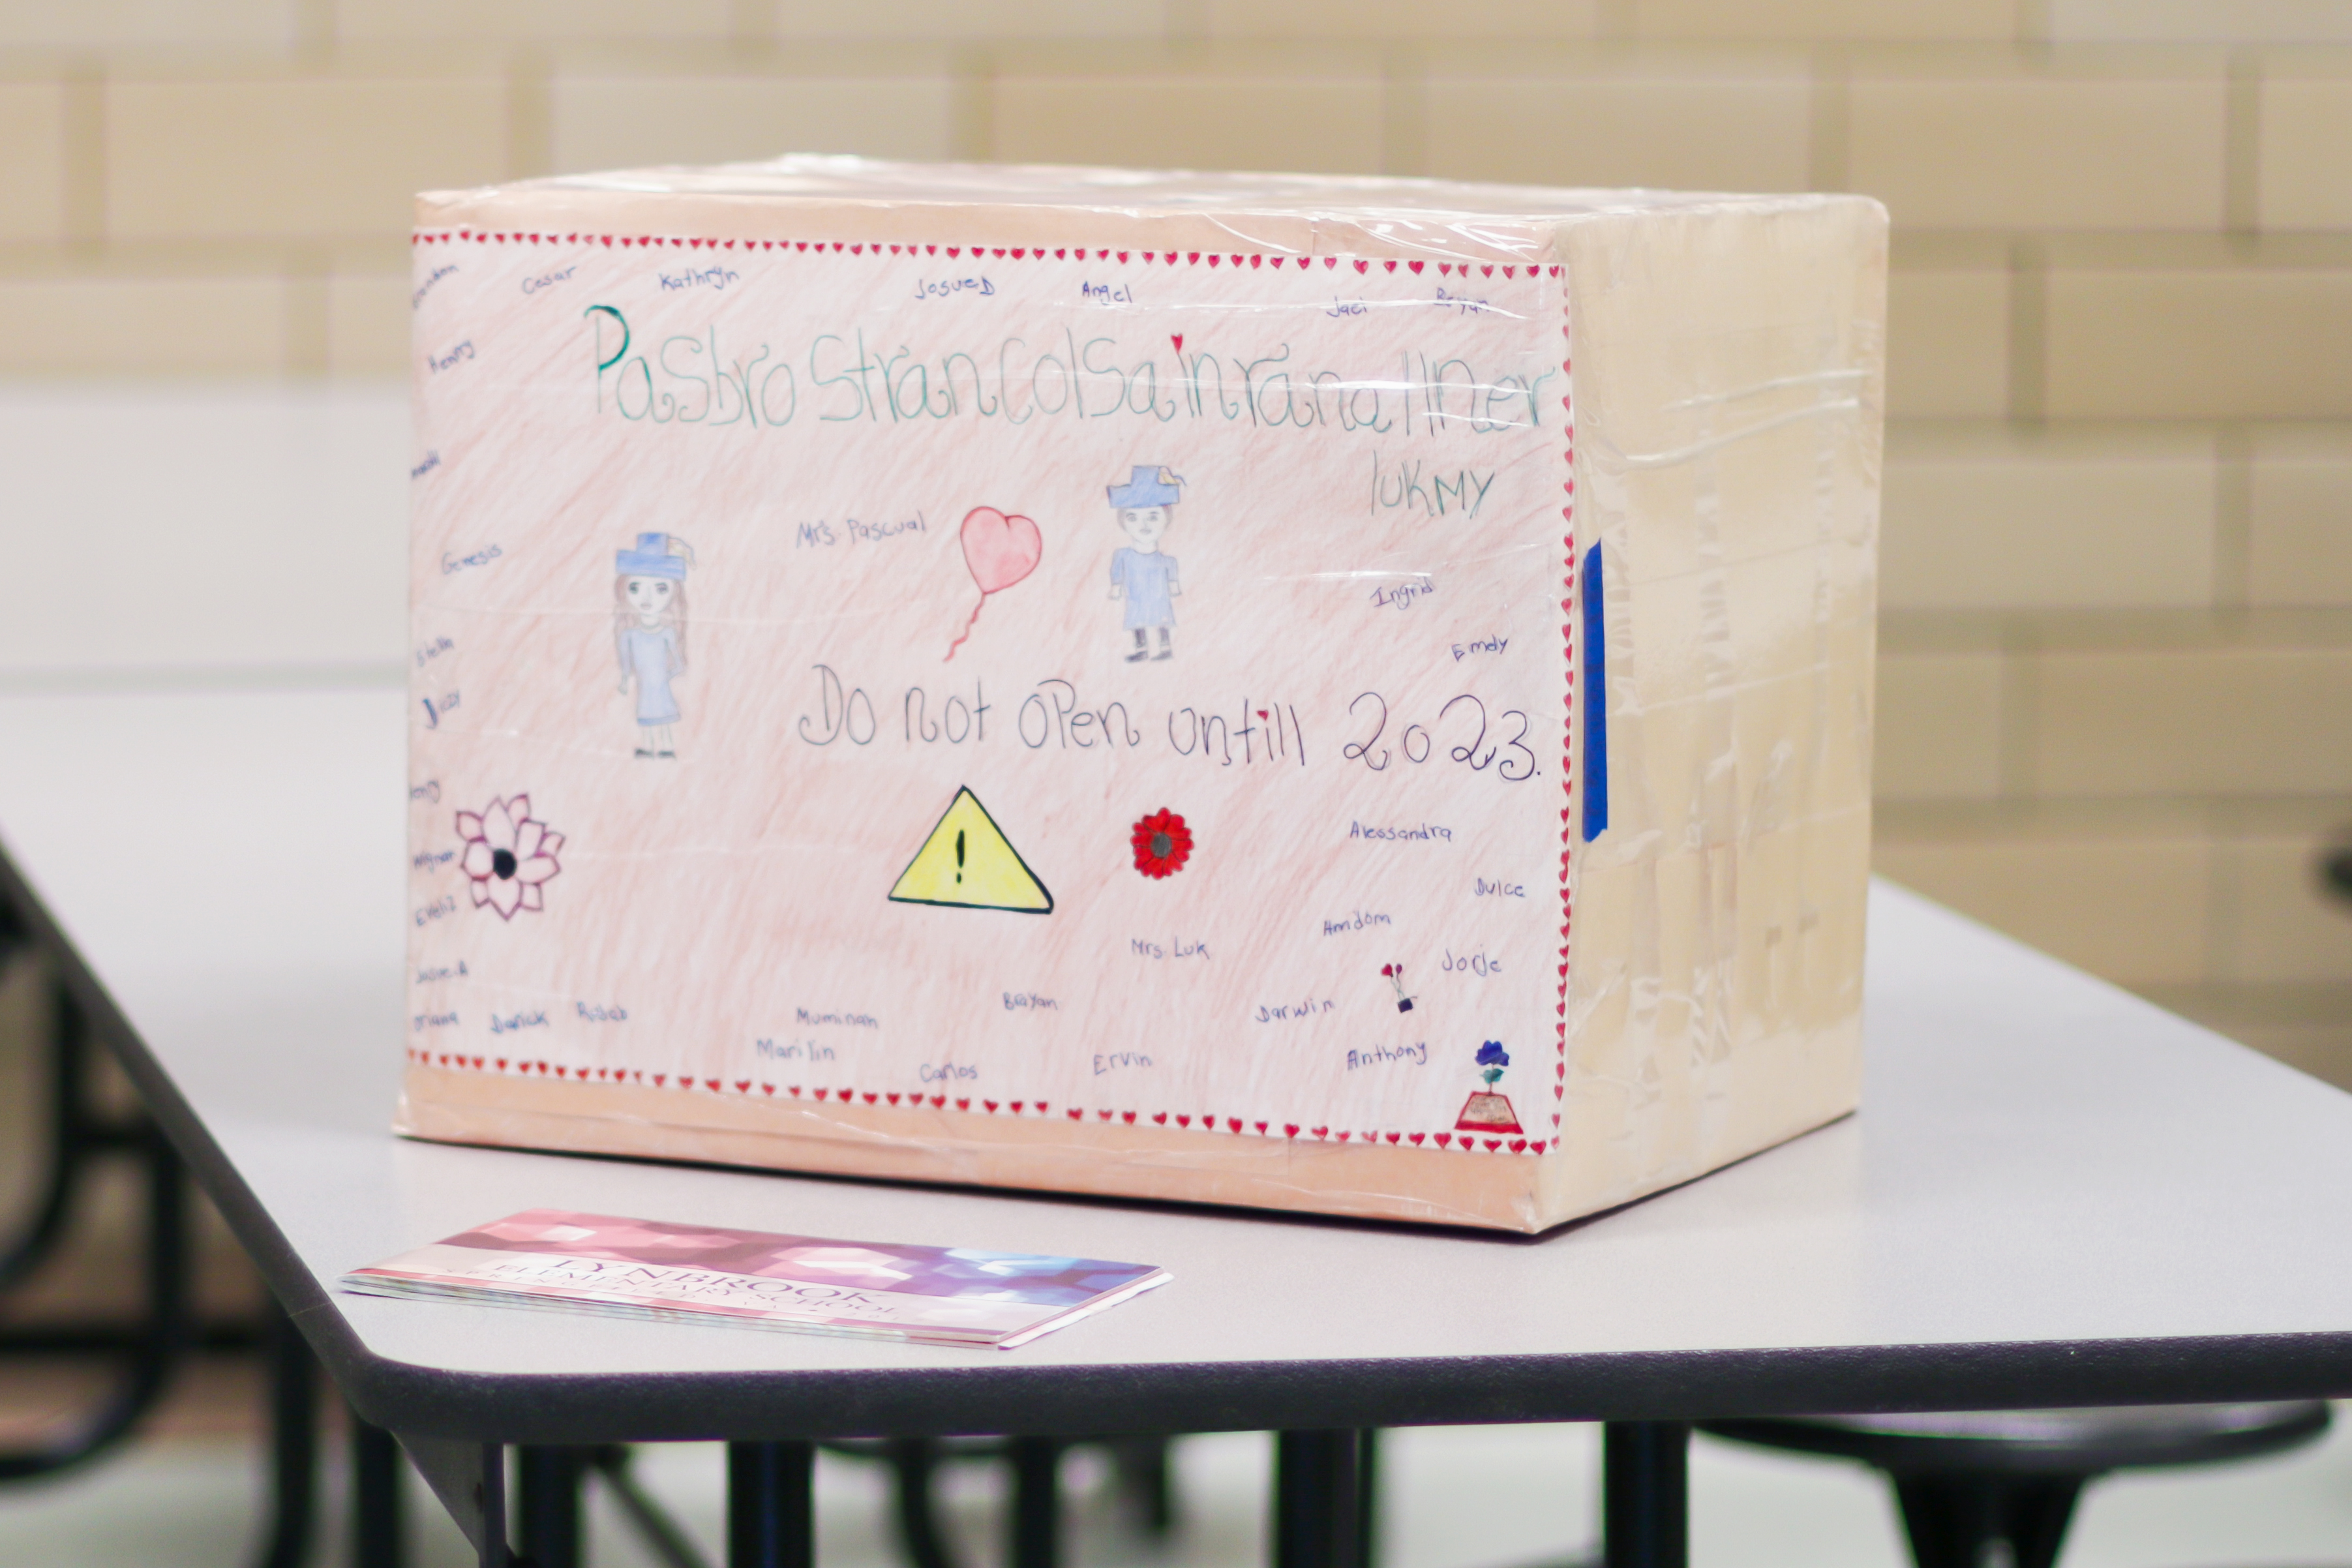 A time capsule box made by Lynbrook Elementary School students in 2017 holds photos, kind words from classmates, academic projects and letters from students to their future selves.